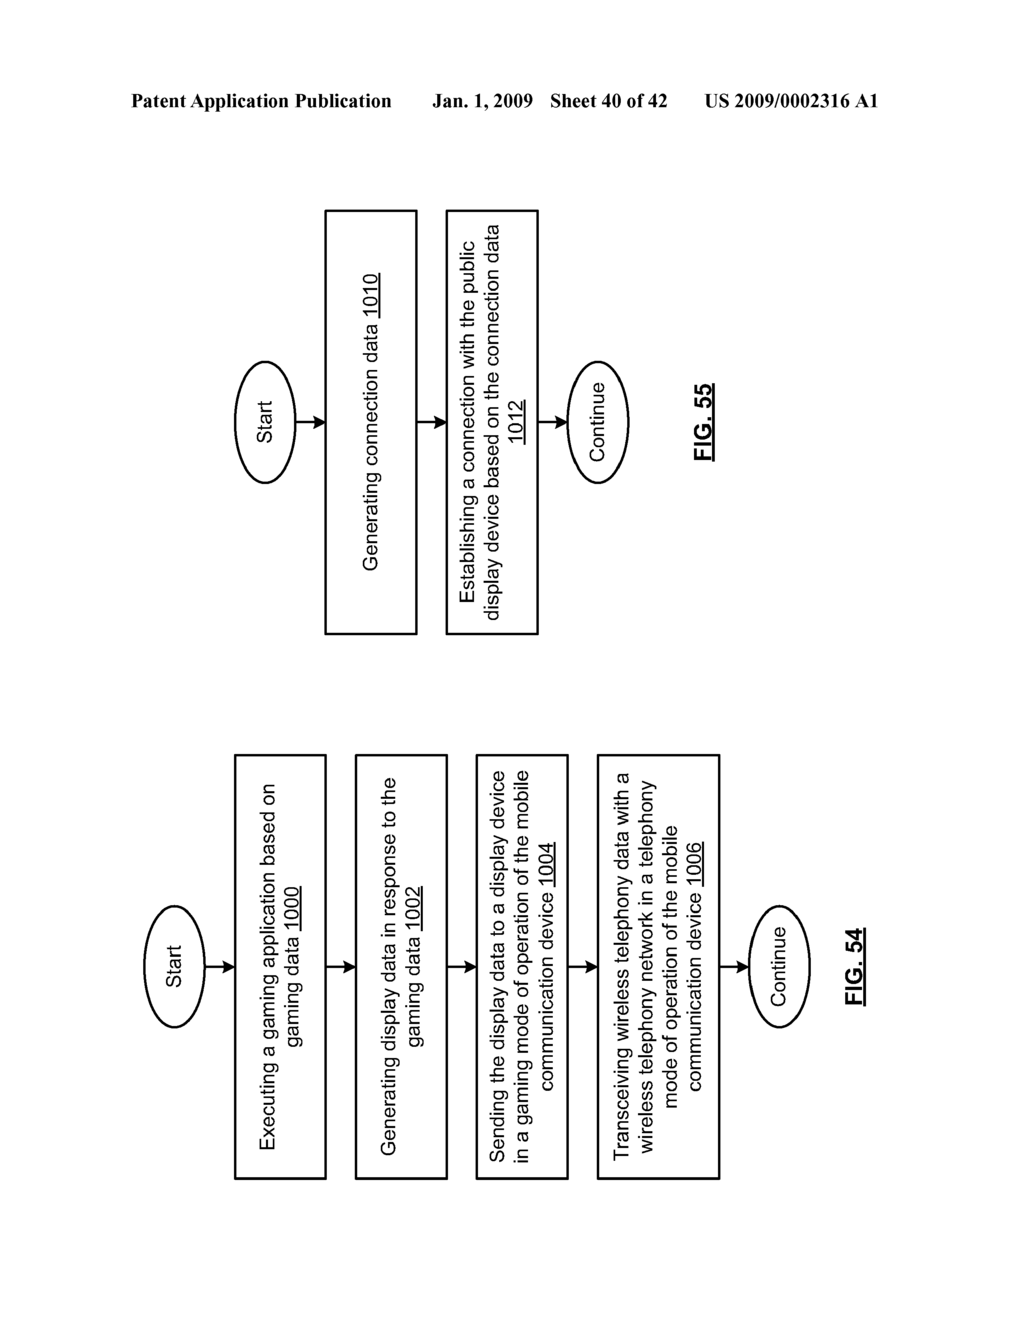 MOBILE COMMUNICATION DEVICE WITH GAME APPLICATION FOR USE IN CONJUNCTION WITH A REMOTE MOBILE COMMUNICATION DEVICE AND METHODS FOR USE THEREWITH - diagram, schematic, and image 41